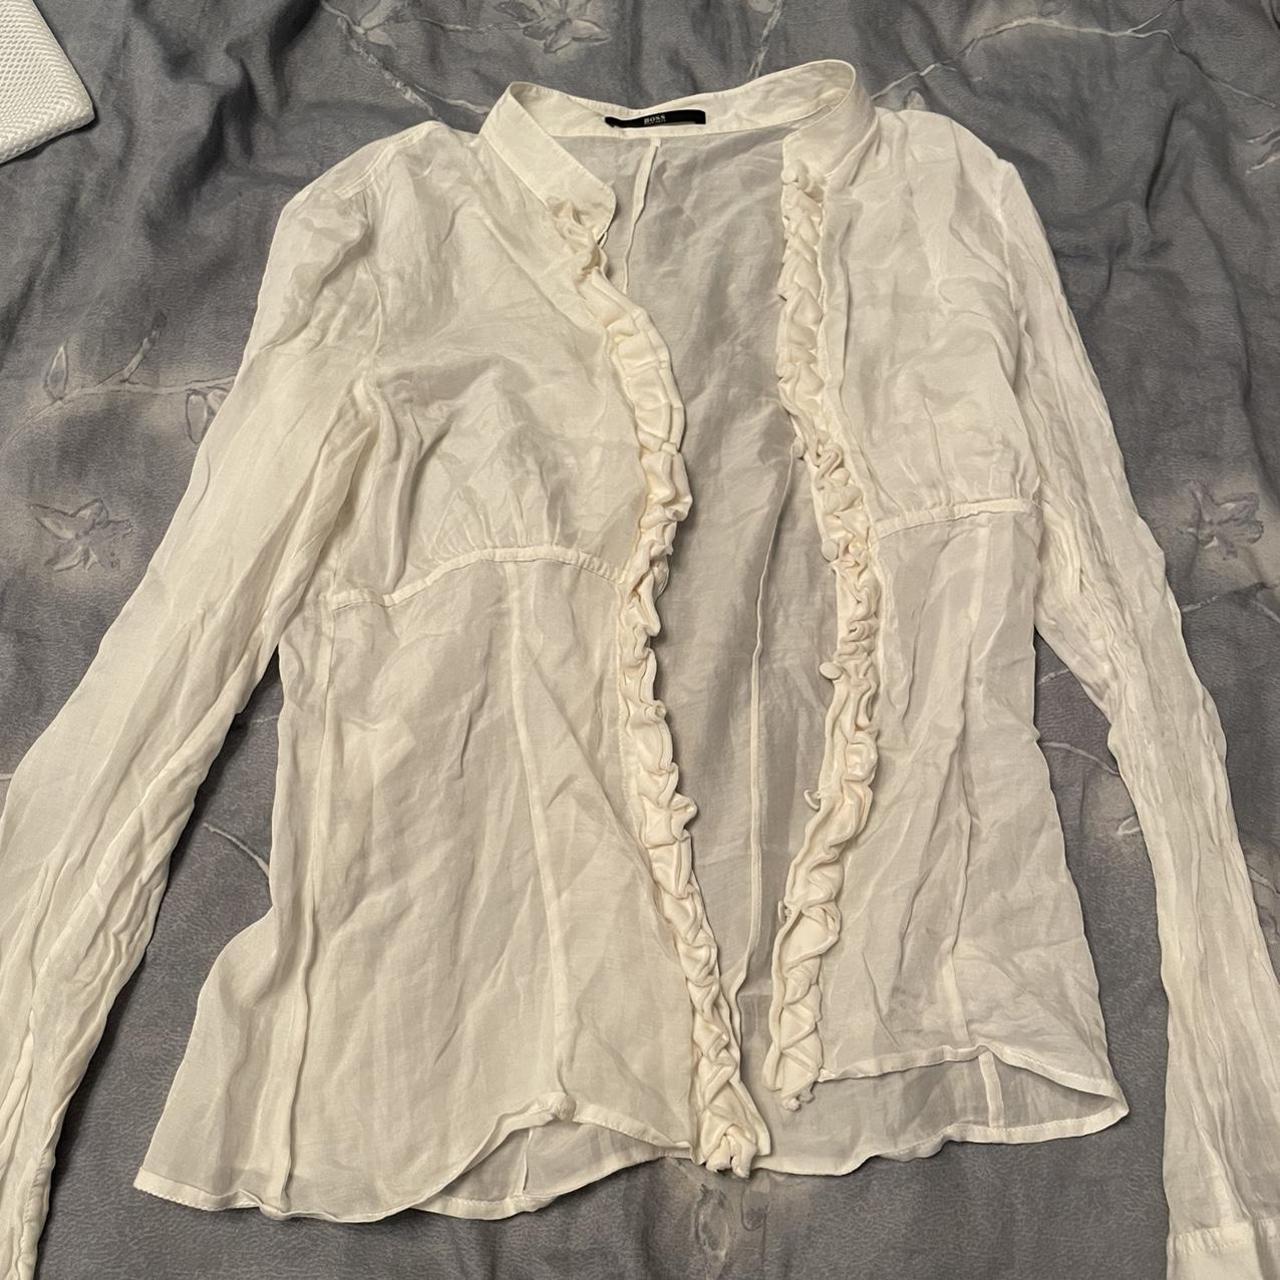 Boss see through white shirt. Very delicate and... - Depop